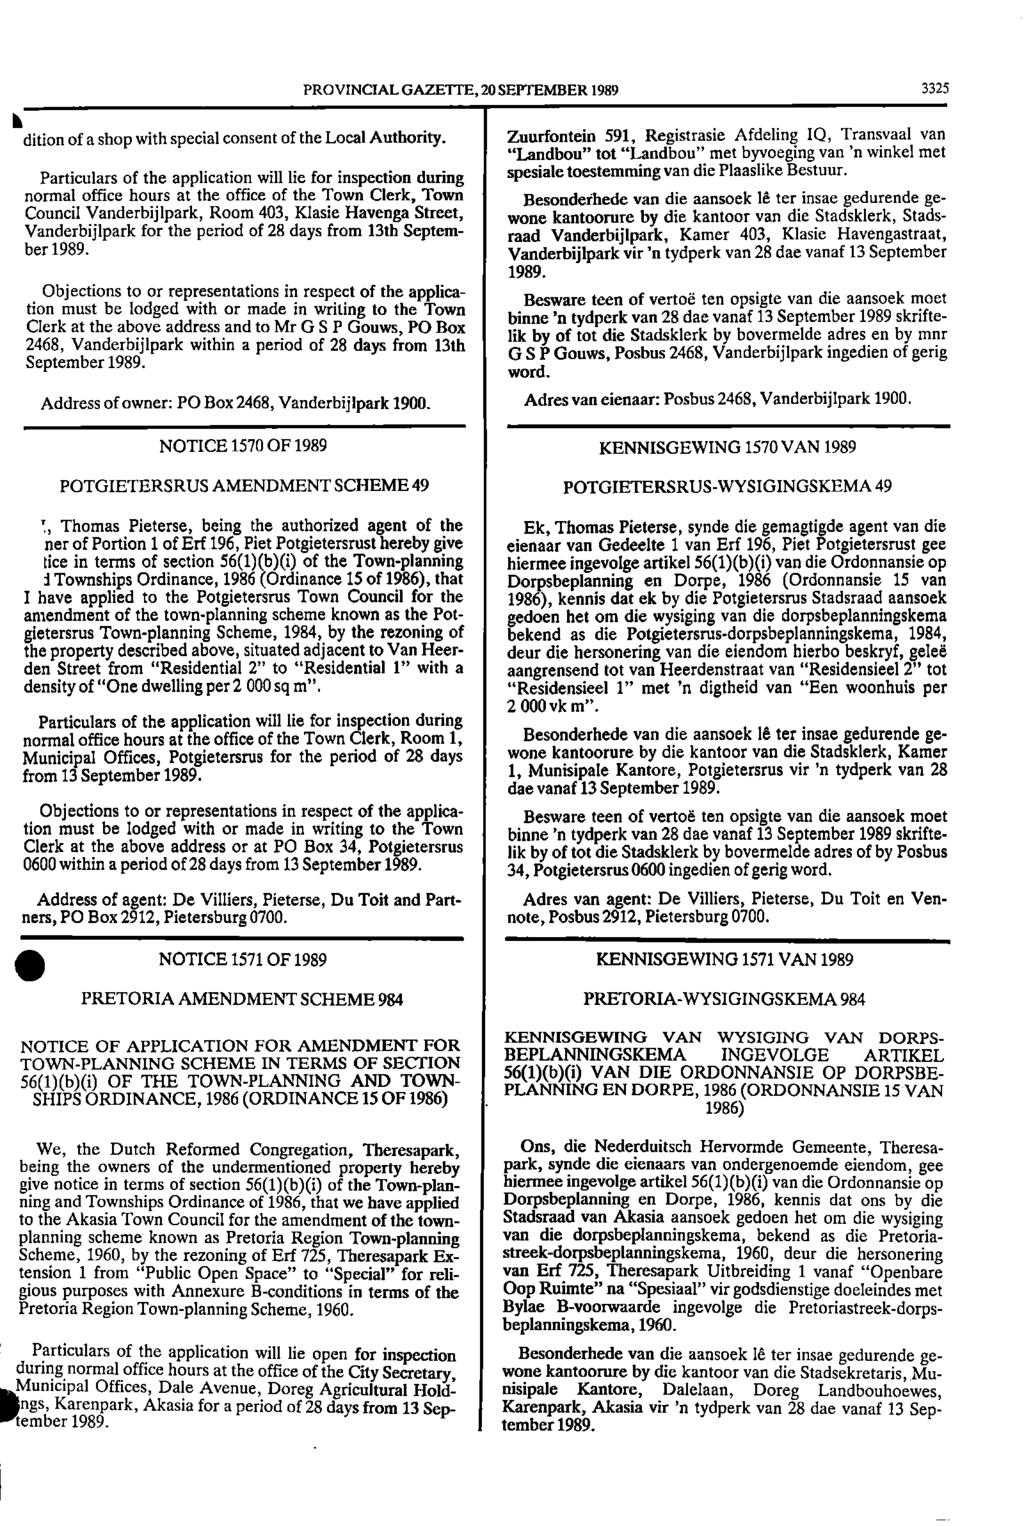 PROVINCIAL GAZETTE, 20 SEPTEMBER 1989 3325 I dition of a shop with special consent of the Local Authority. Zuurfontein 591, Registrasie Afdeling IQ.